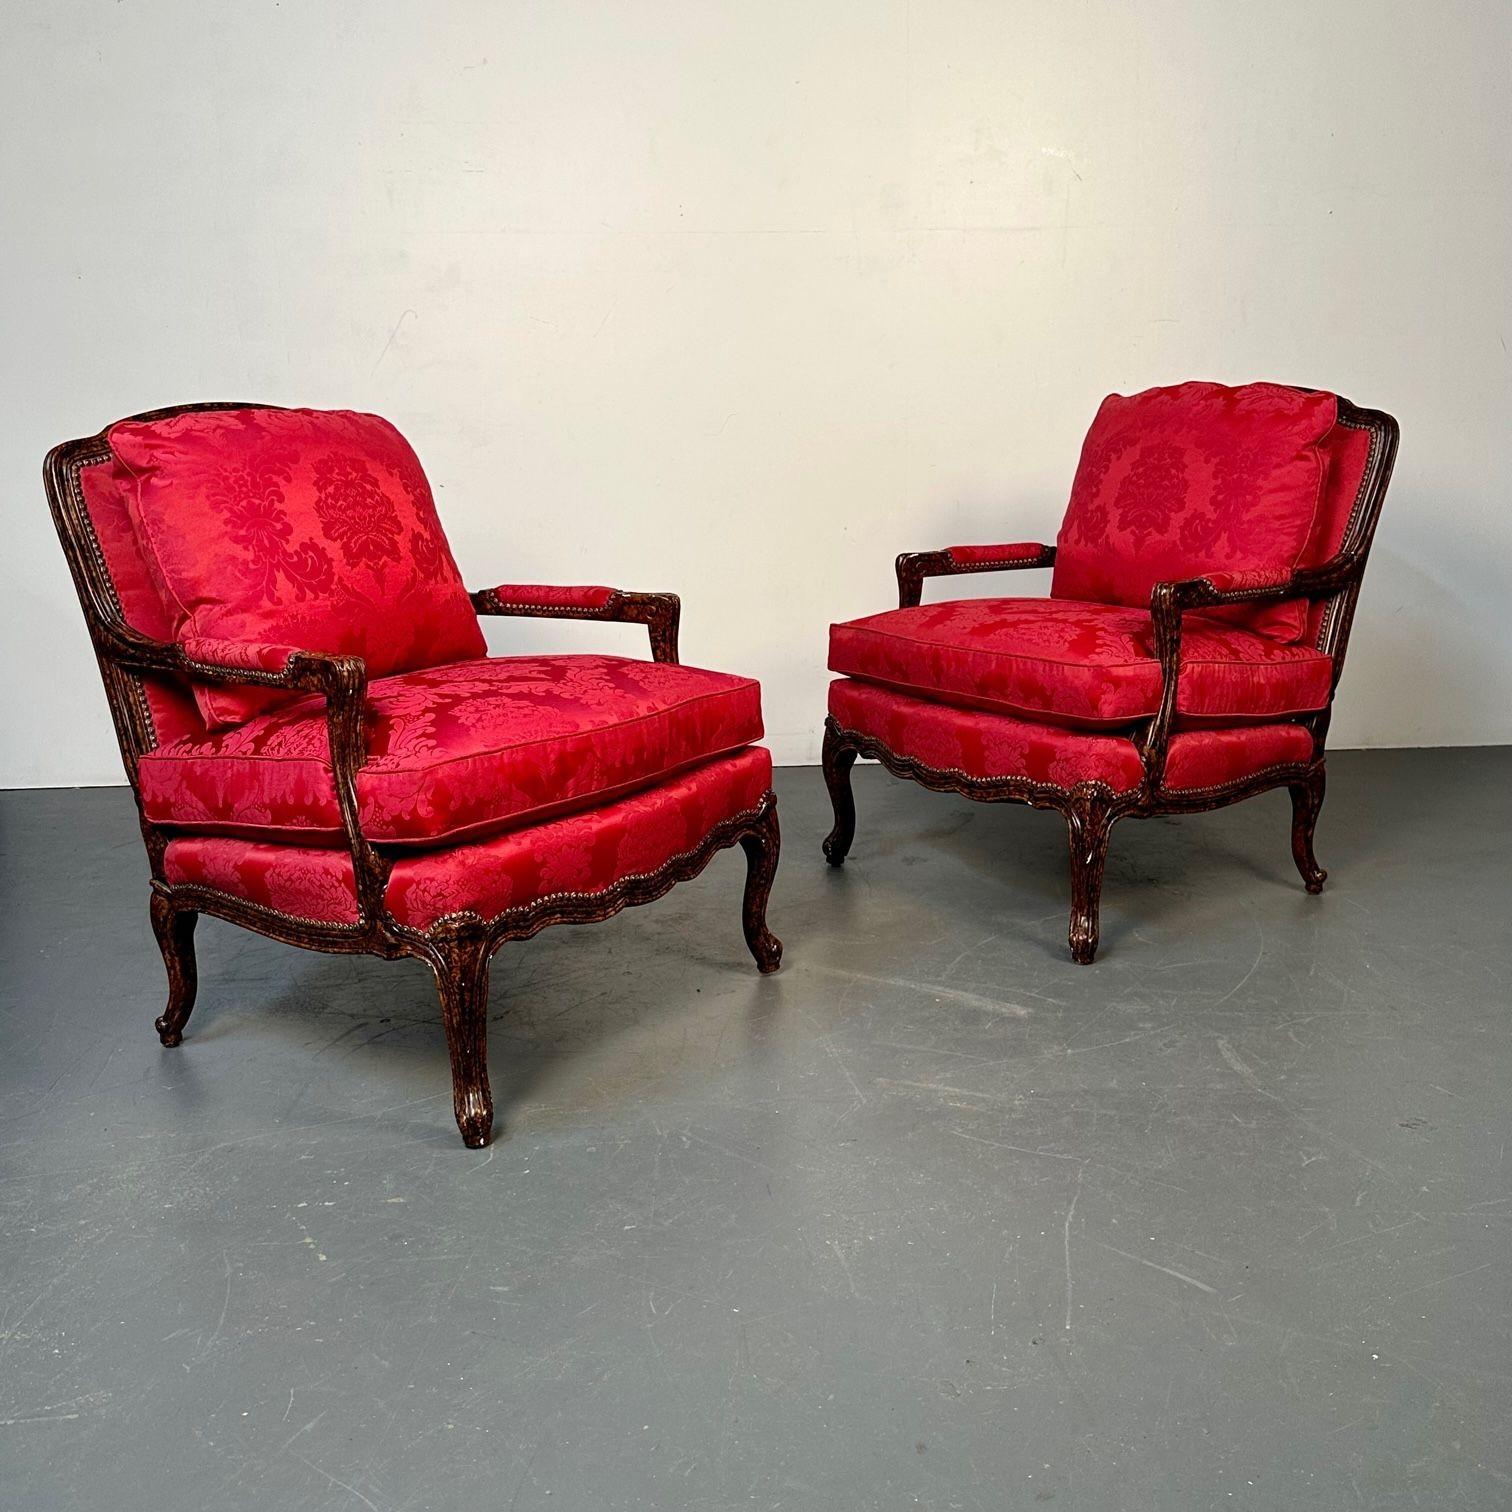 Pair of Tortoise Shell Lounge Chairs/ Marquis by Theodore Alexander, Fauteuils

A stunning pair of Louis XV Style Large Arm or Lounge Chairs by Theodore Alexander. Each having tortoise shell decorated frame having padded seats and back rests in a